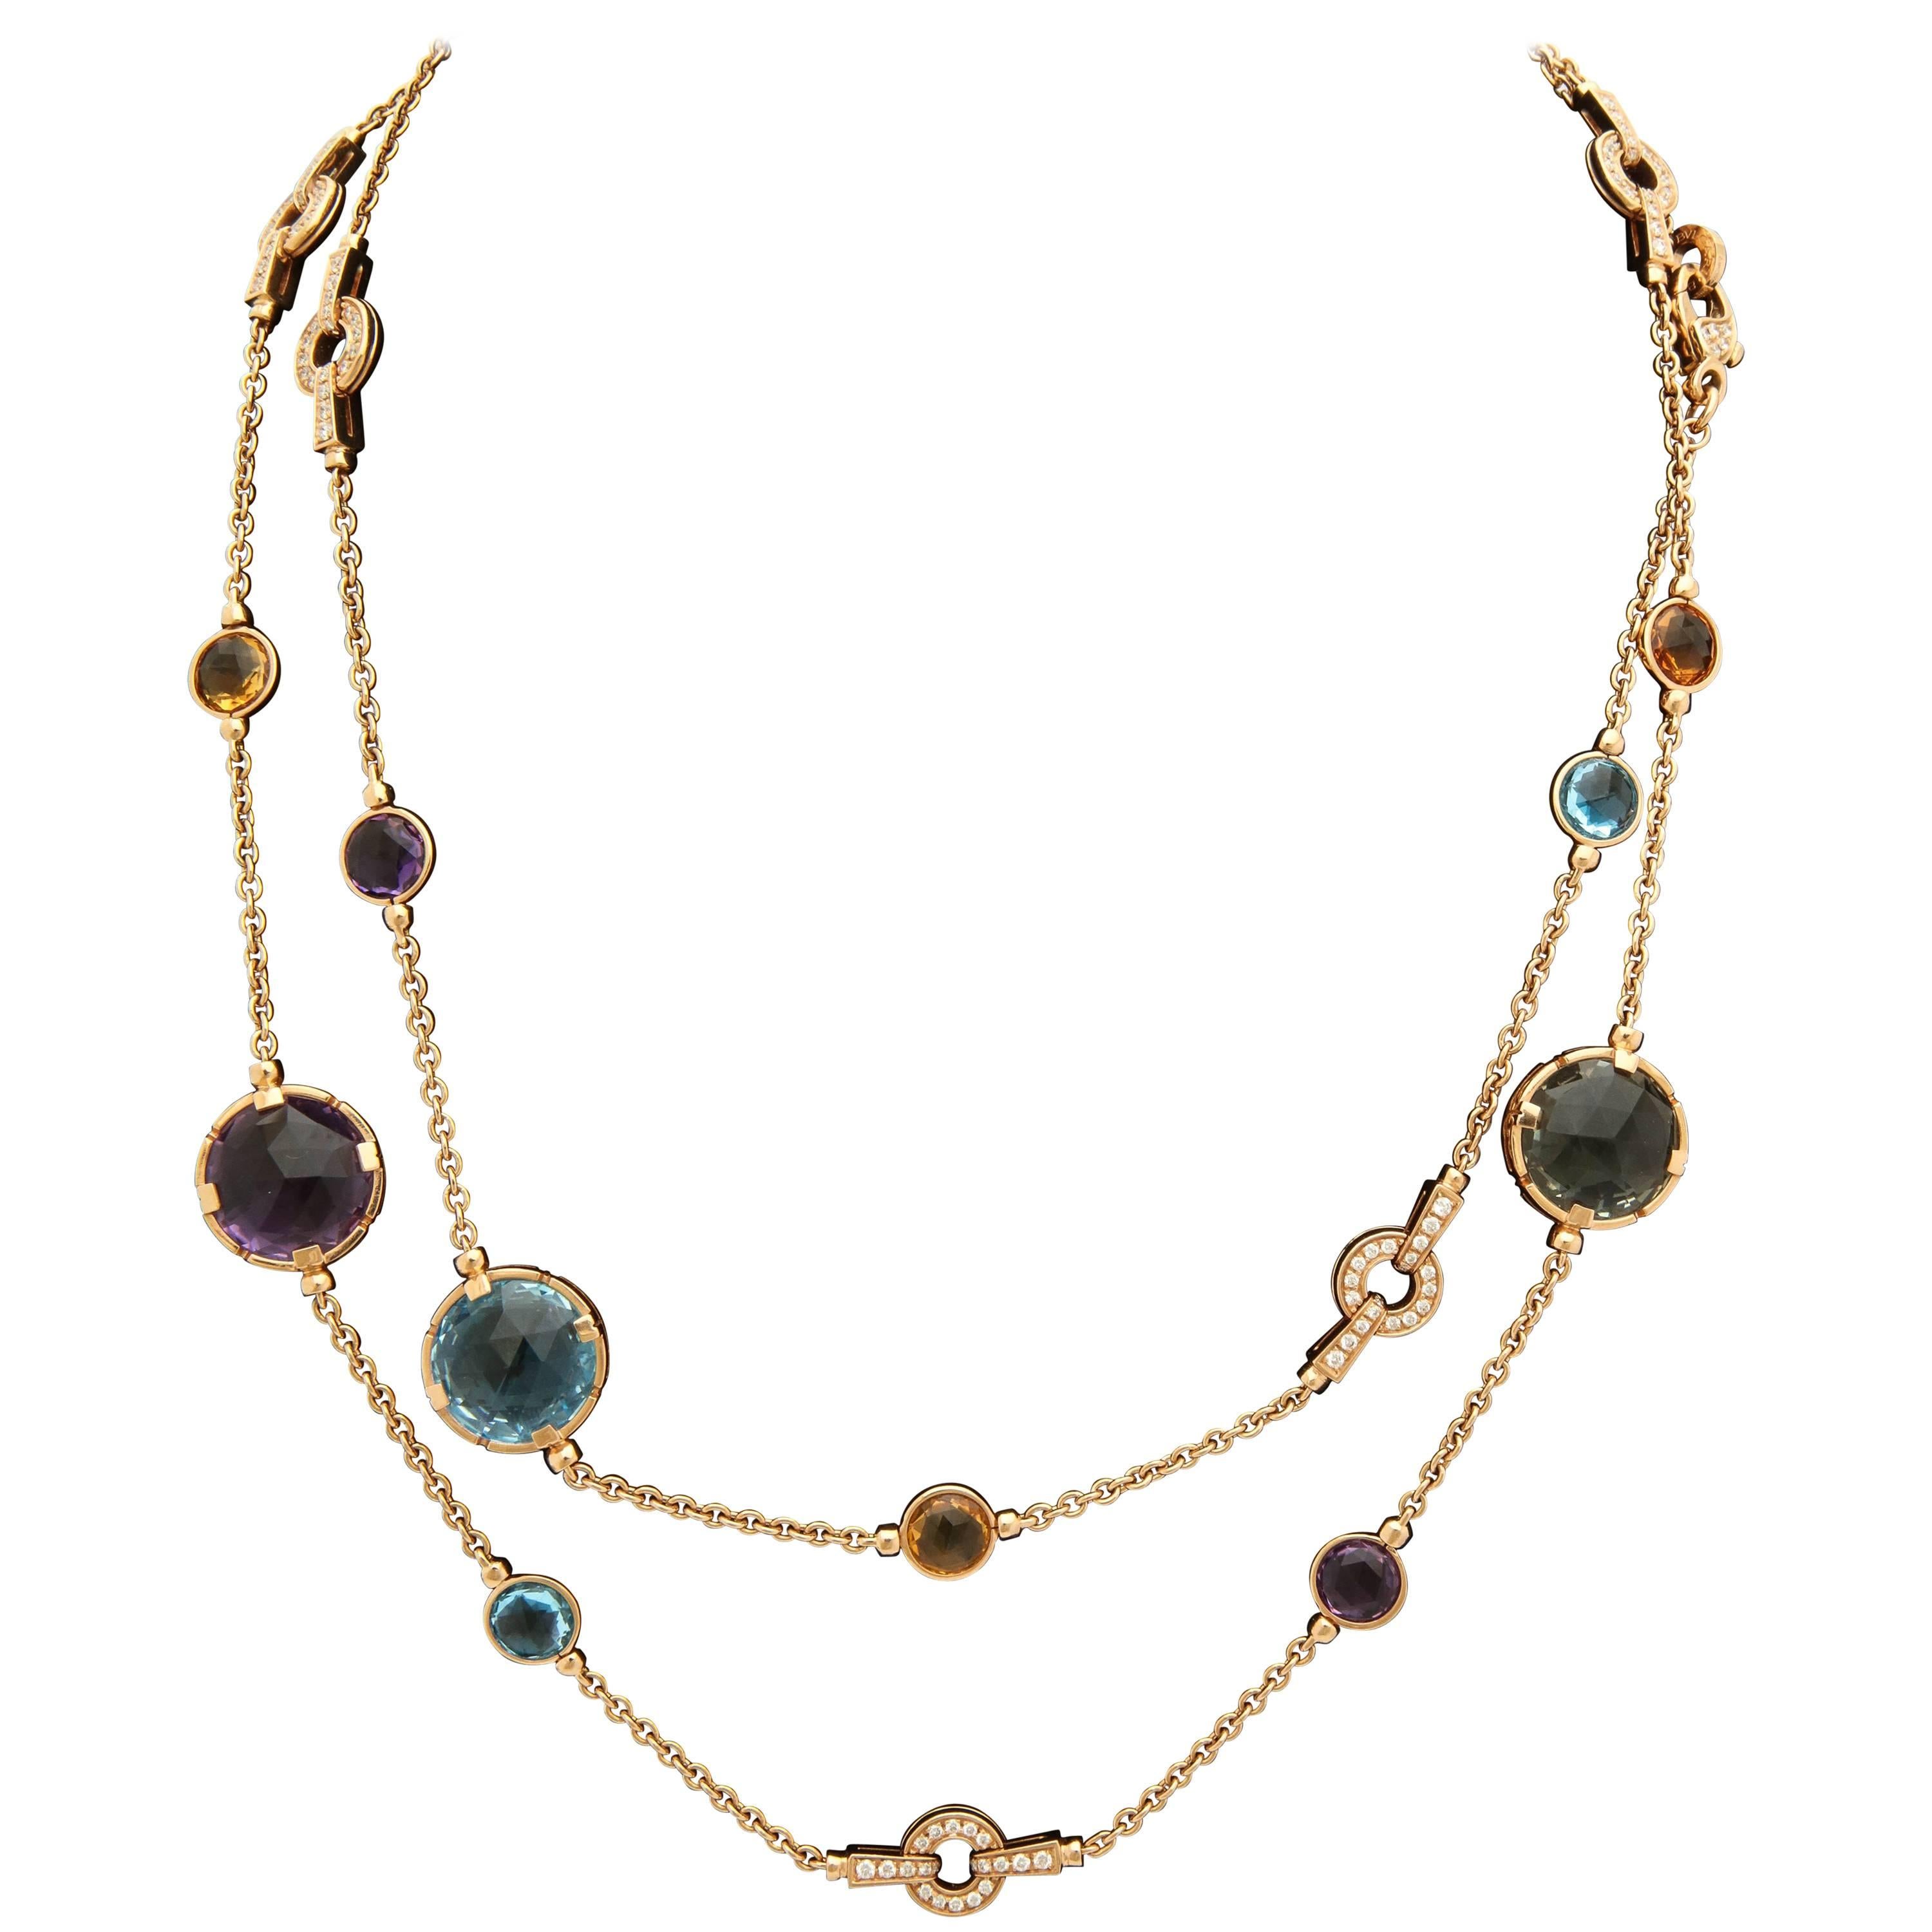 One Ladies Long 18kt Rose Gold Link Chain Flexible And Articulated Necklace Embellished With Bezel Set And Prong Set Blue Topaz Stones,Amethyst Stones Citrine Stones And Light Green Tourmaline Stones. Note All Colored Stones Are Cut In A Briolette